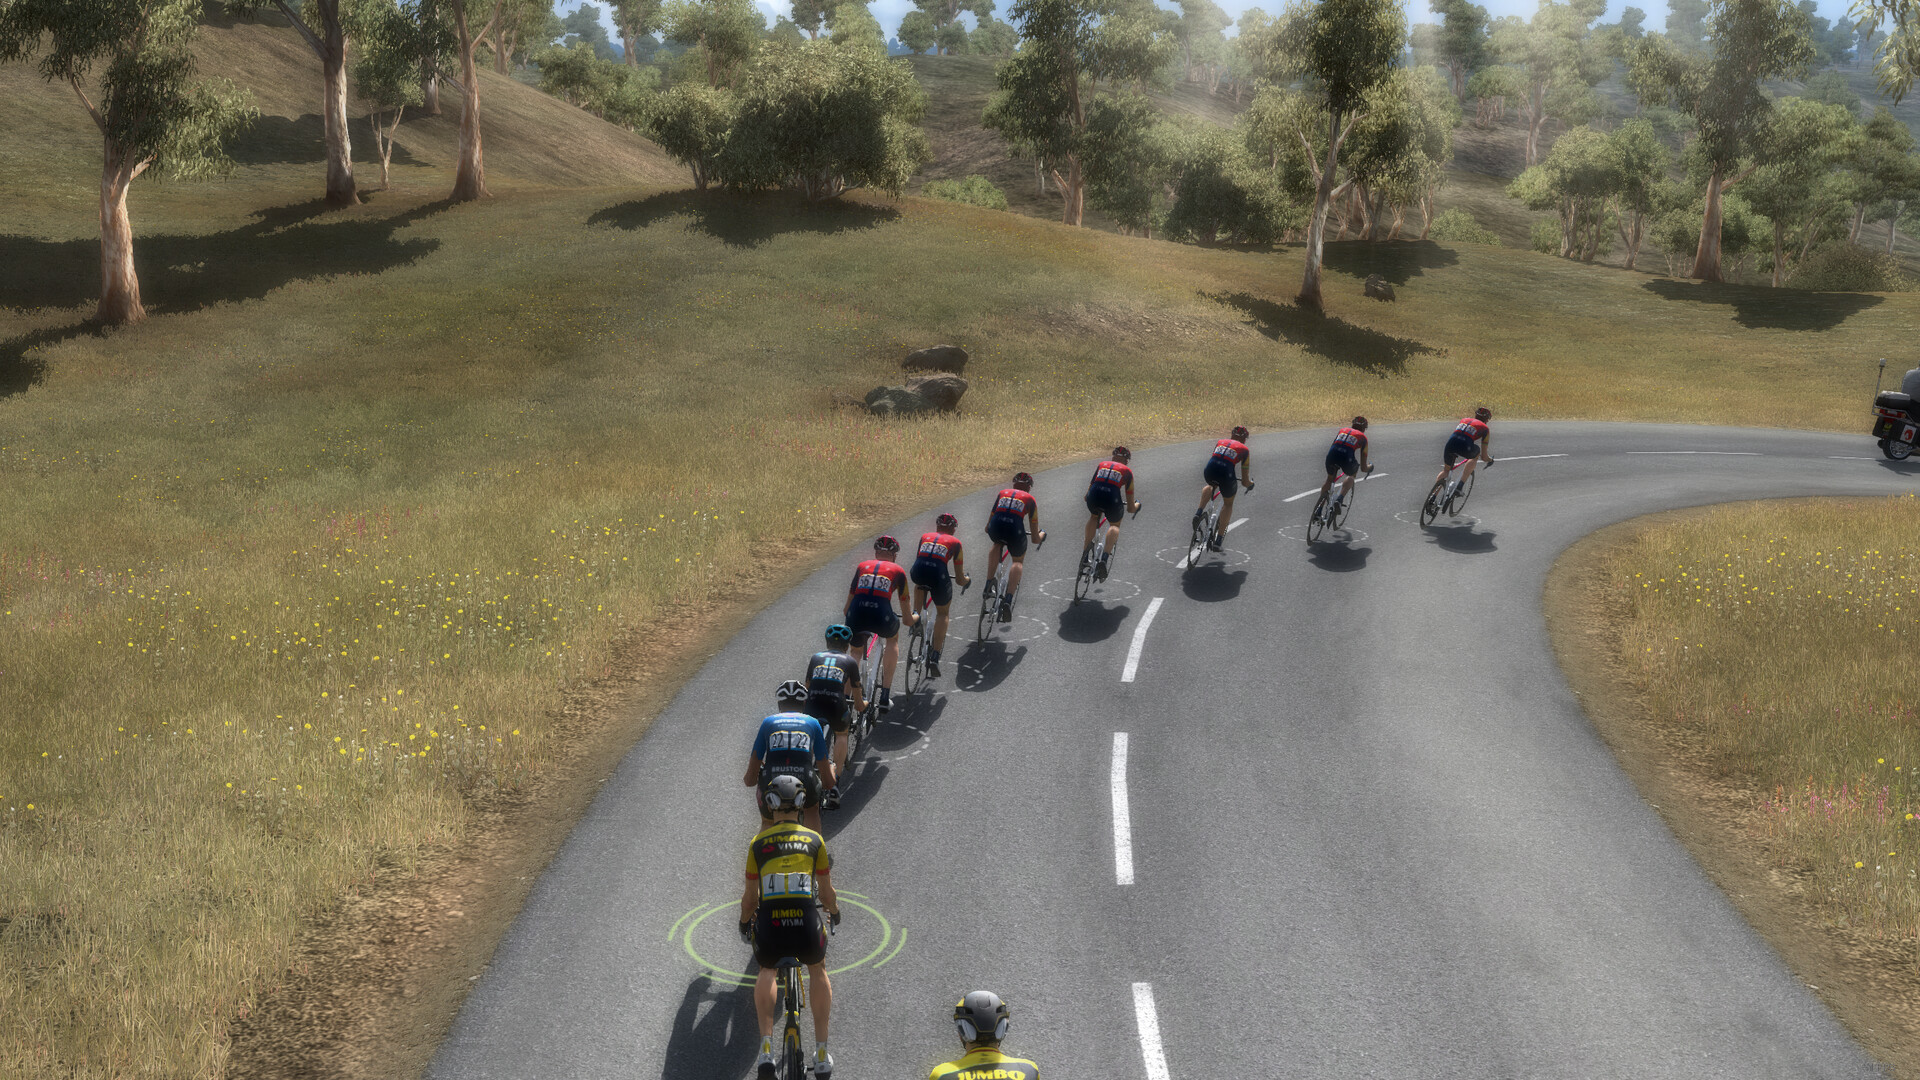 Tour de France and Pro Cycling Manager 2023, the latest edition of